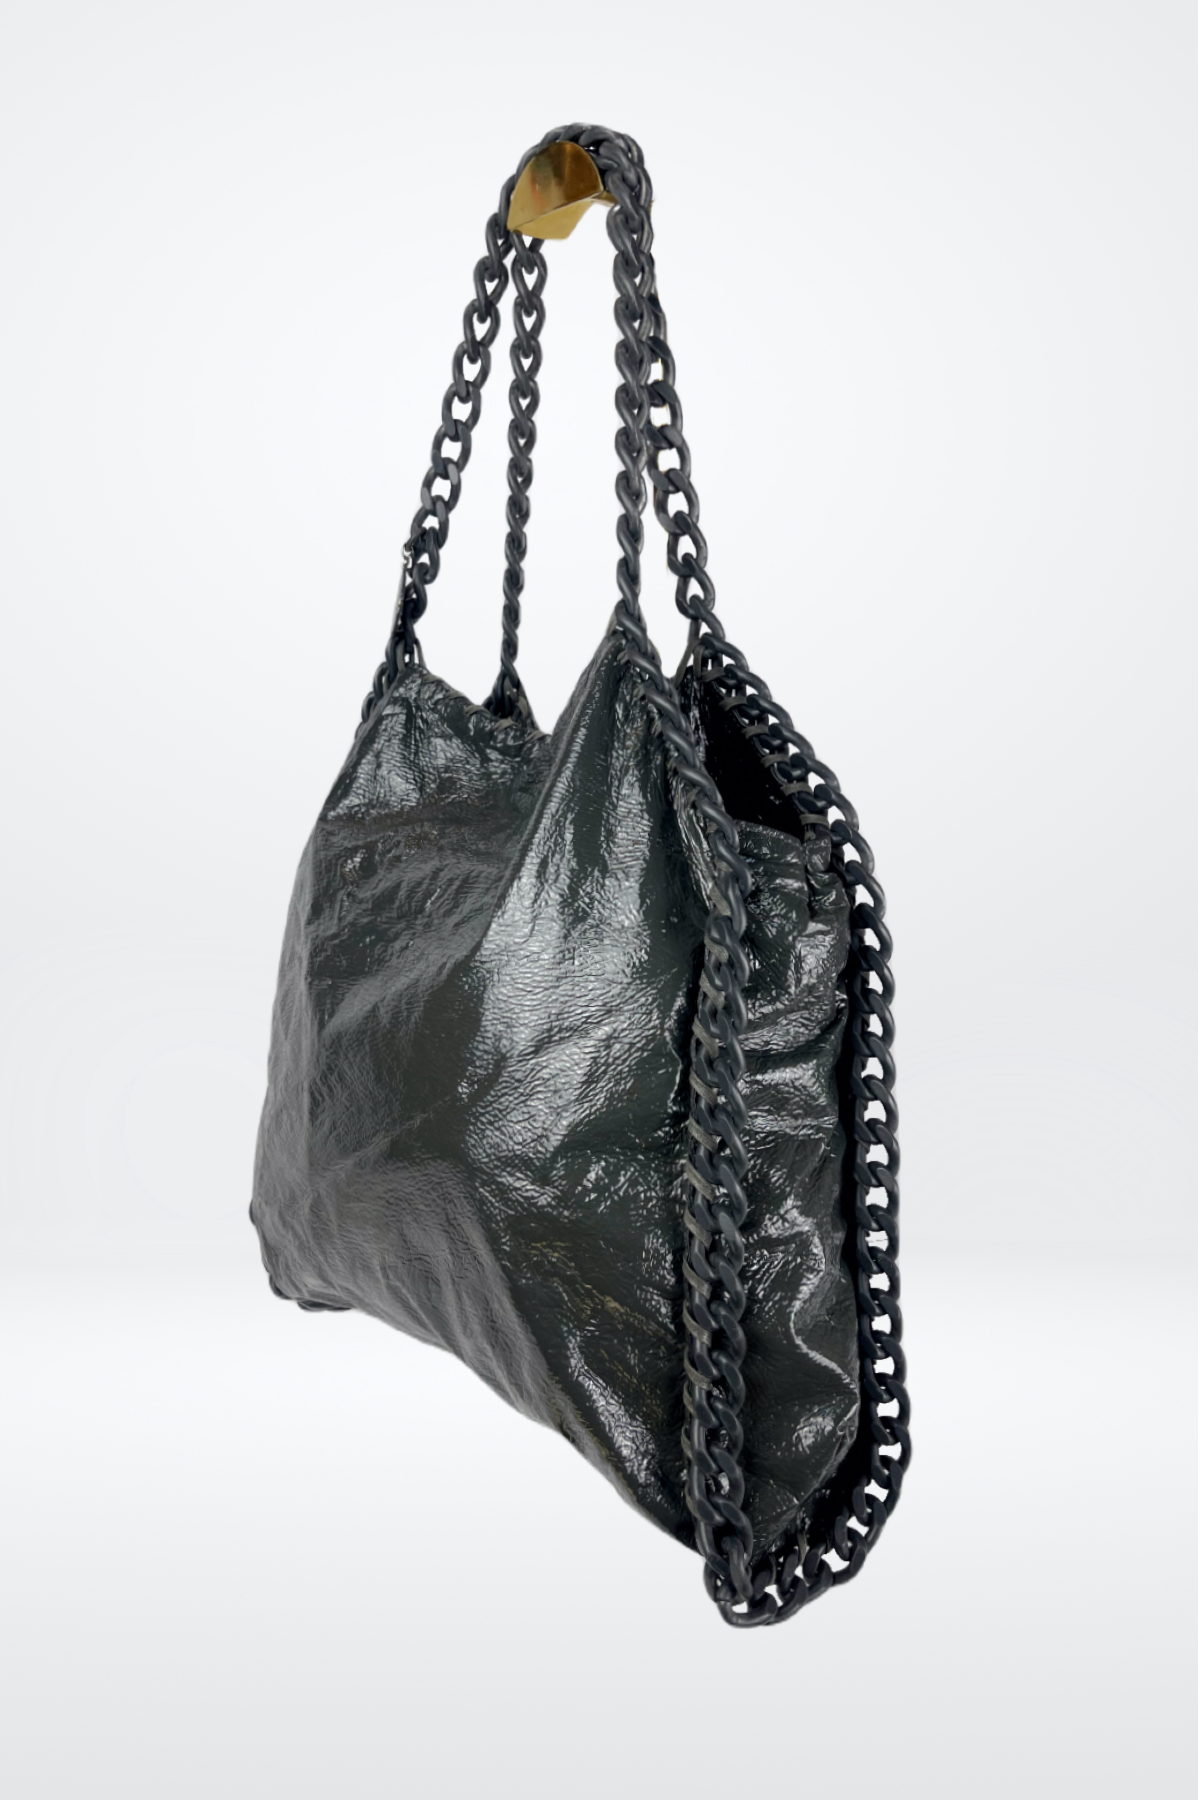 Stella McCartney Special Edition Falabella Oversized Chain Tote in Charcoal